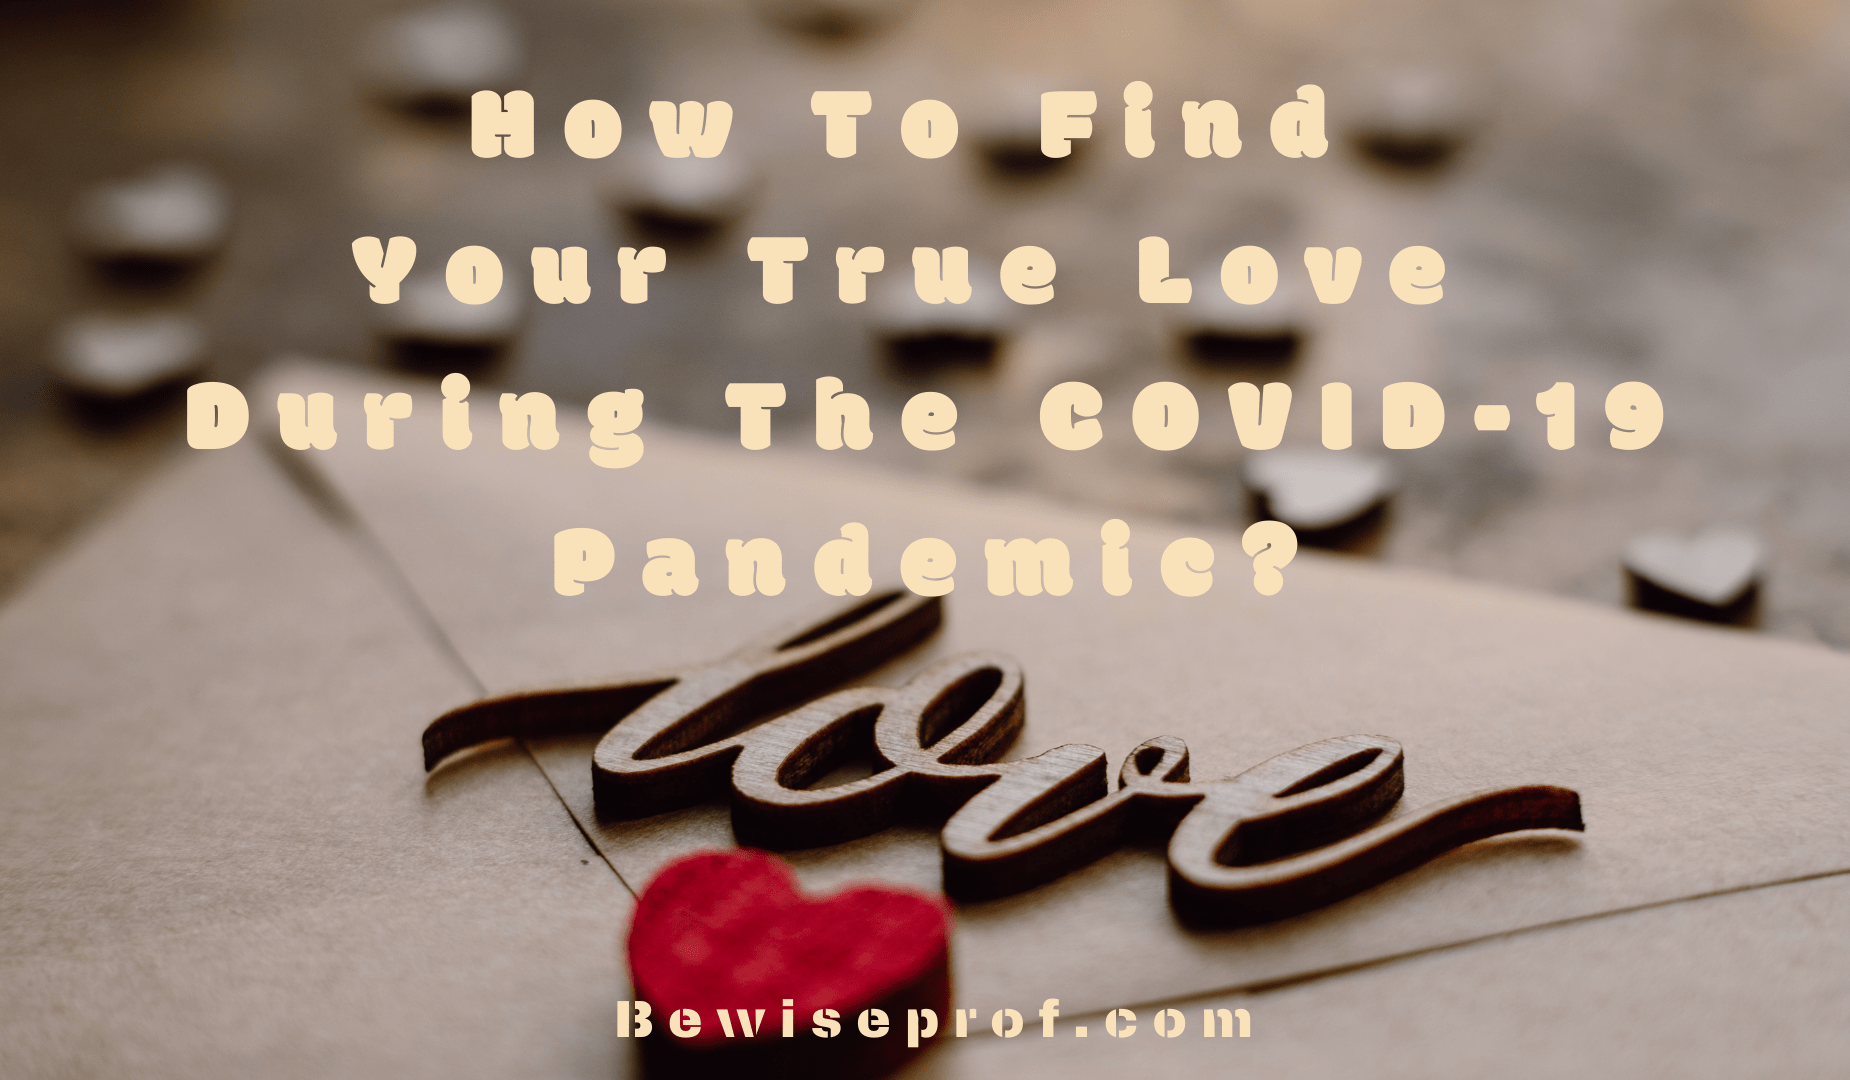 How To Find Your True Love During The COVID-19 Pandemic?